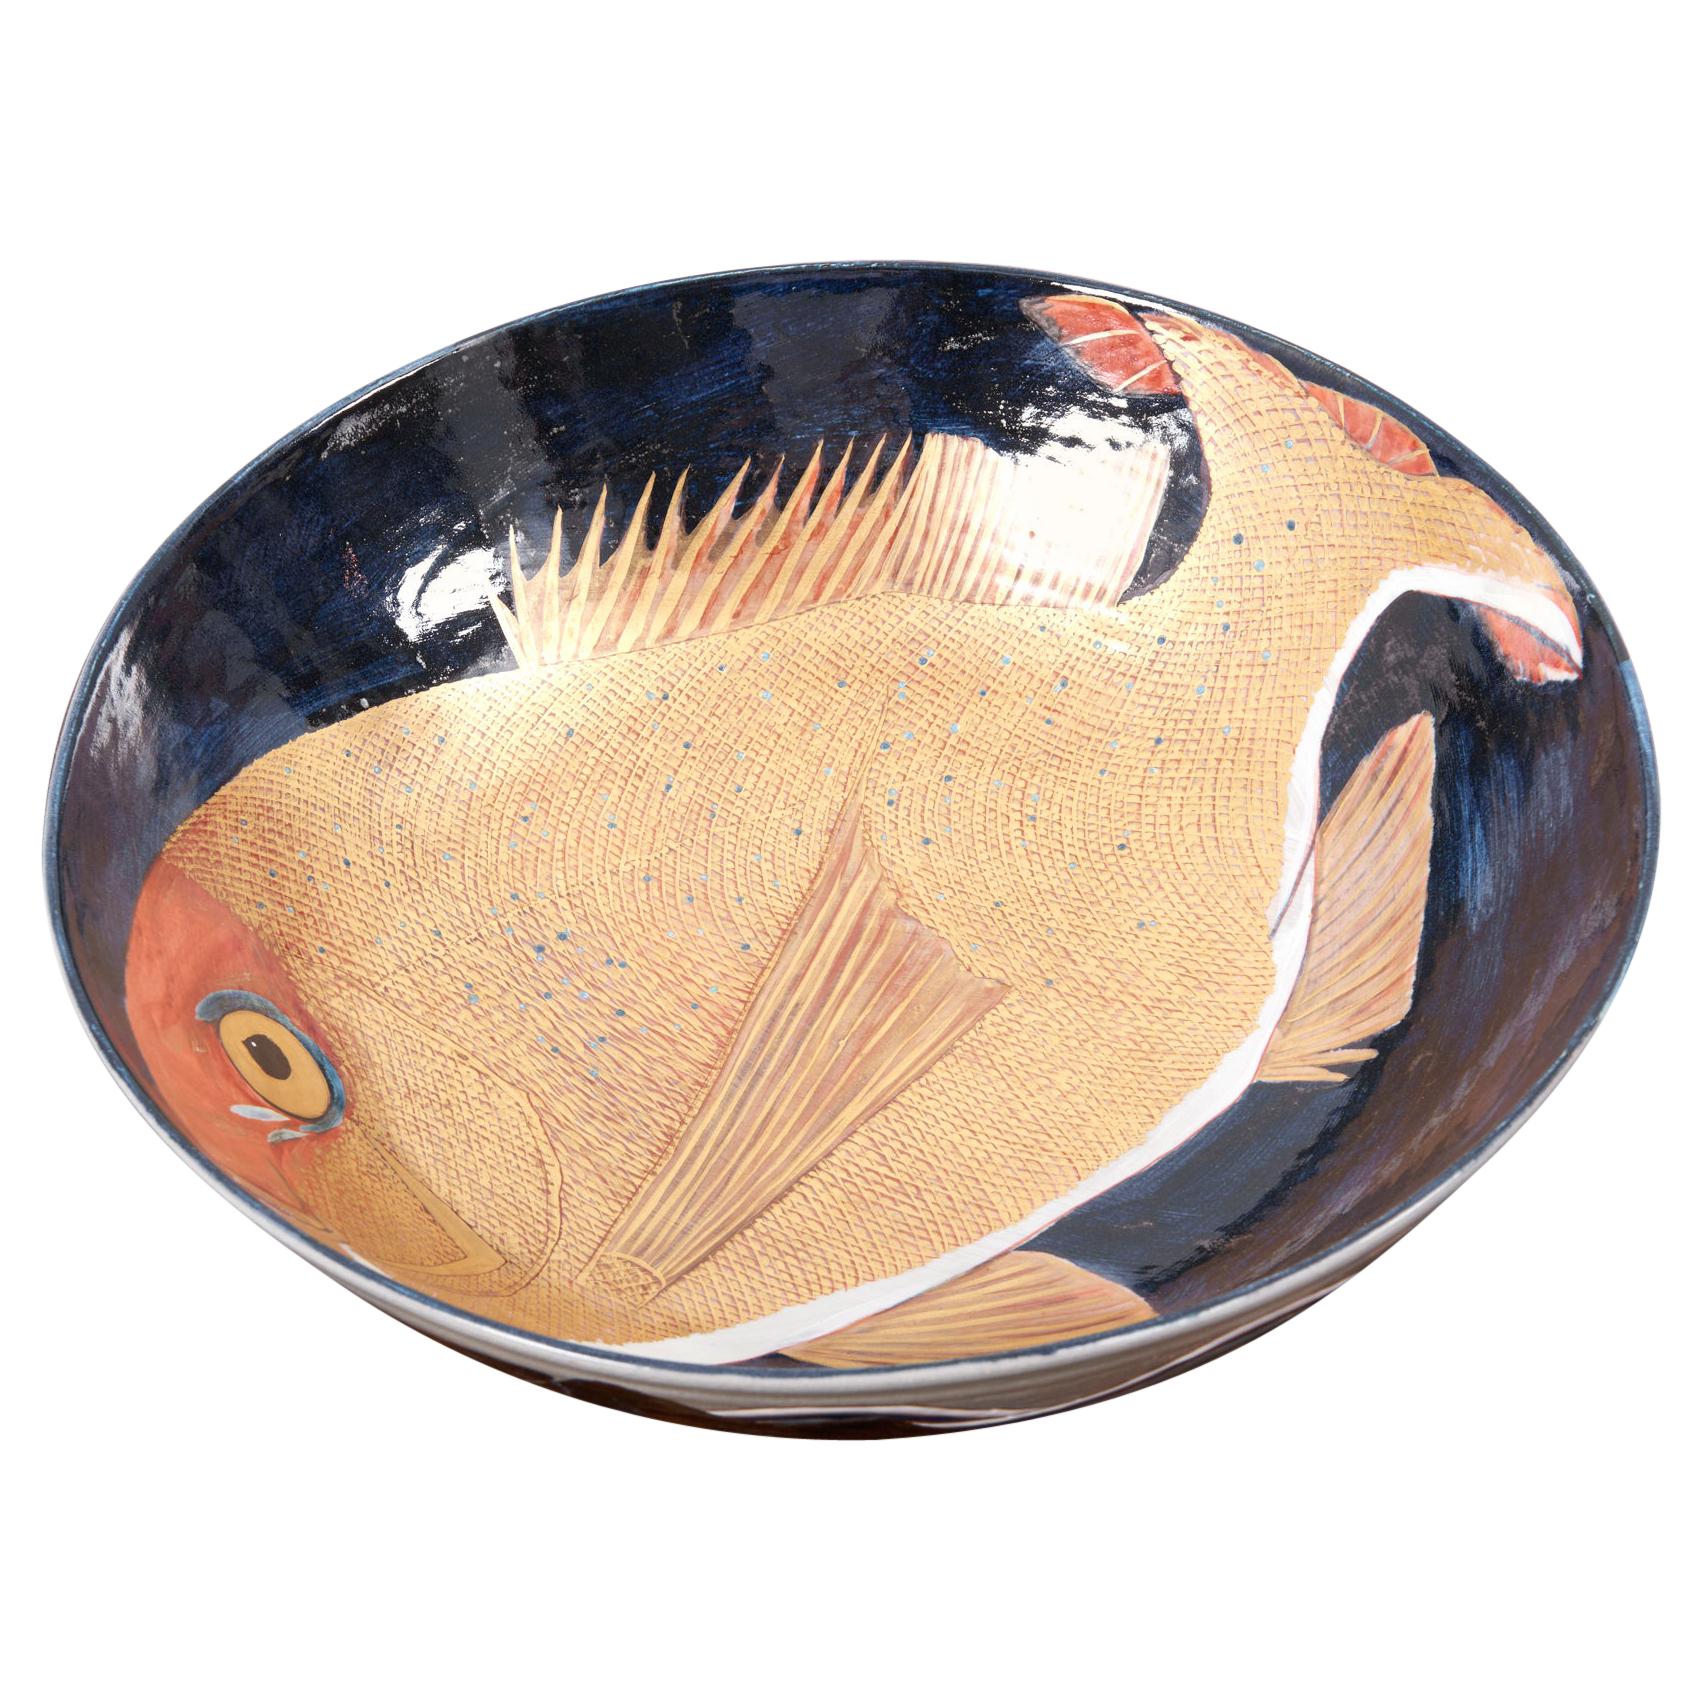 Hand Painted Ceramic Bowl, Japan, 2016 For Sale